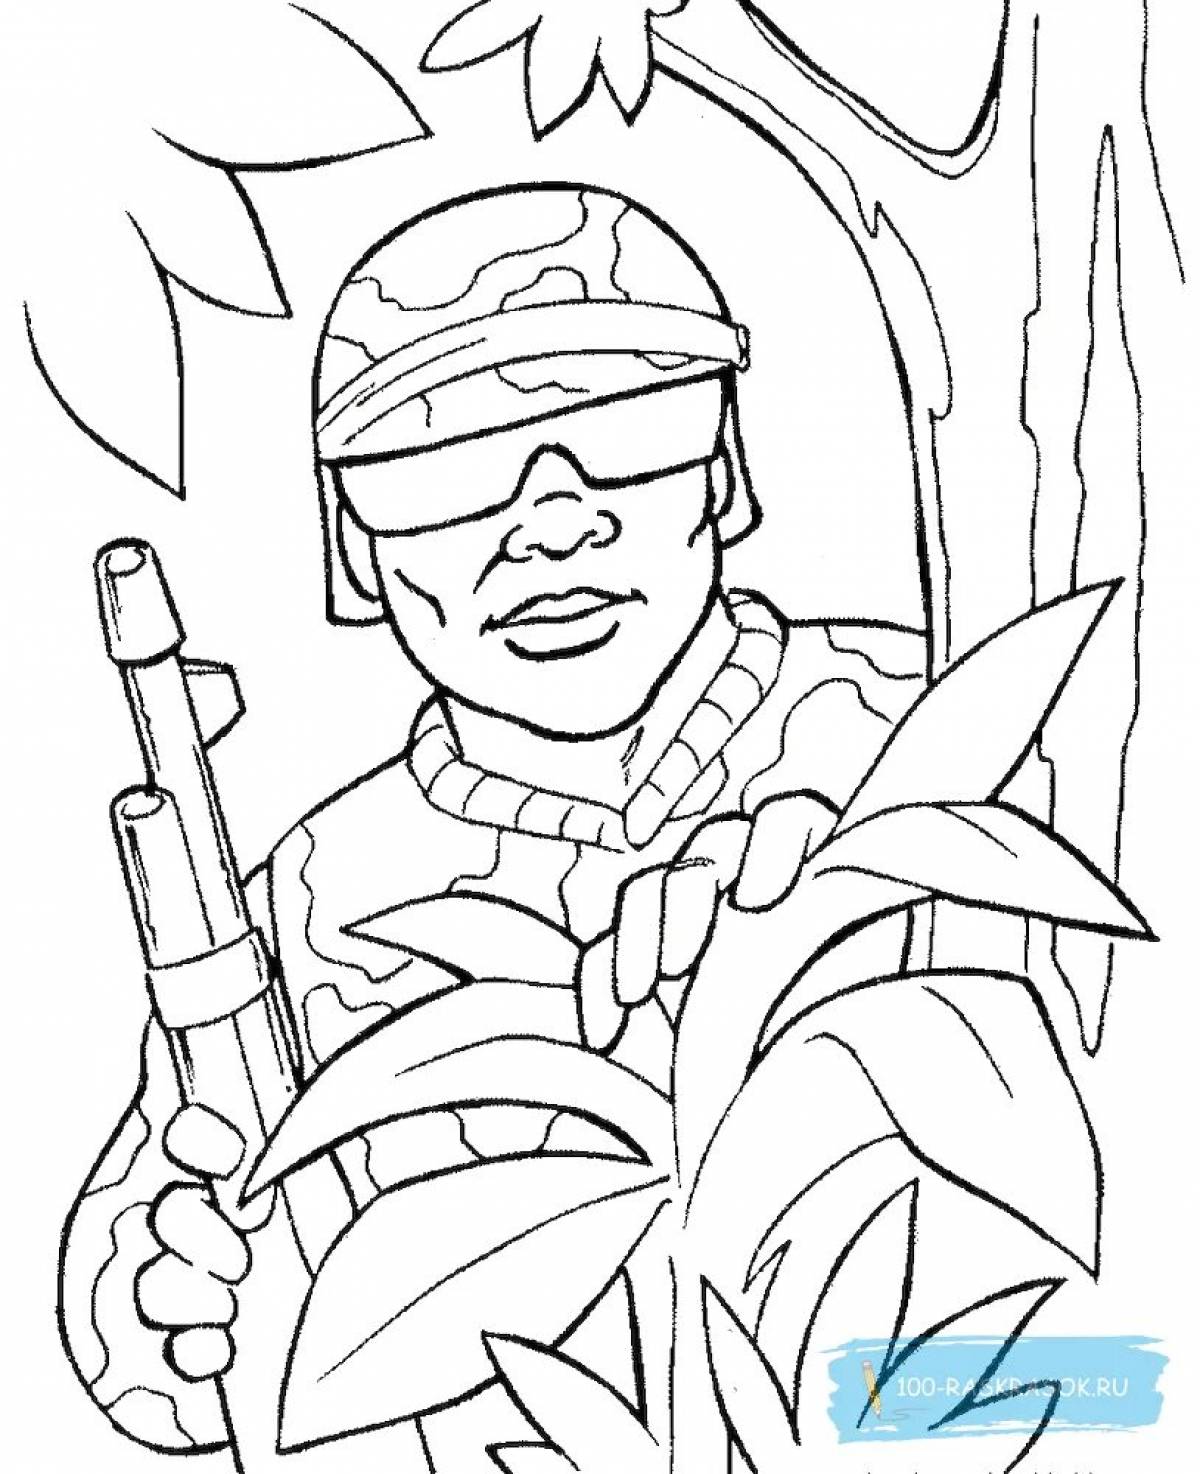 Fearless Soldier and Child coloring page